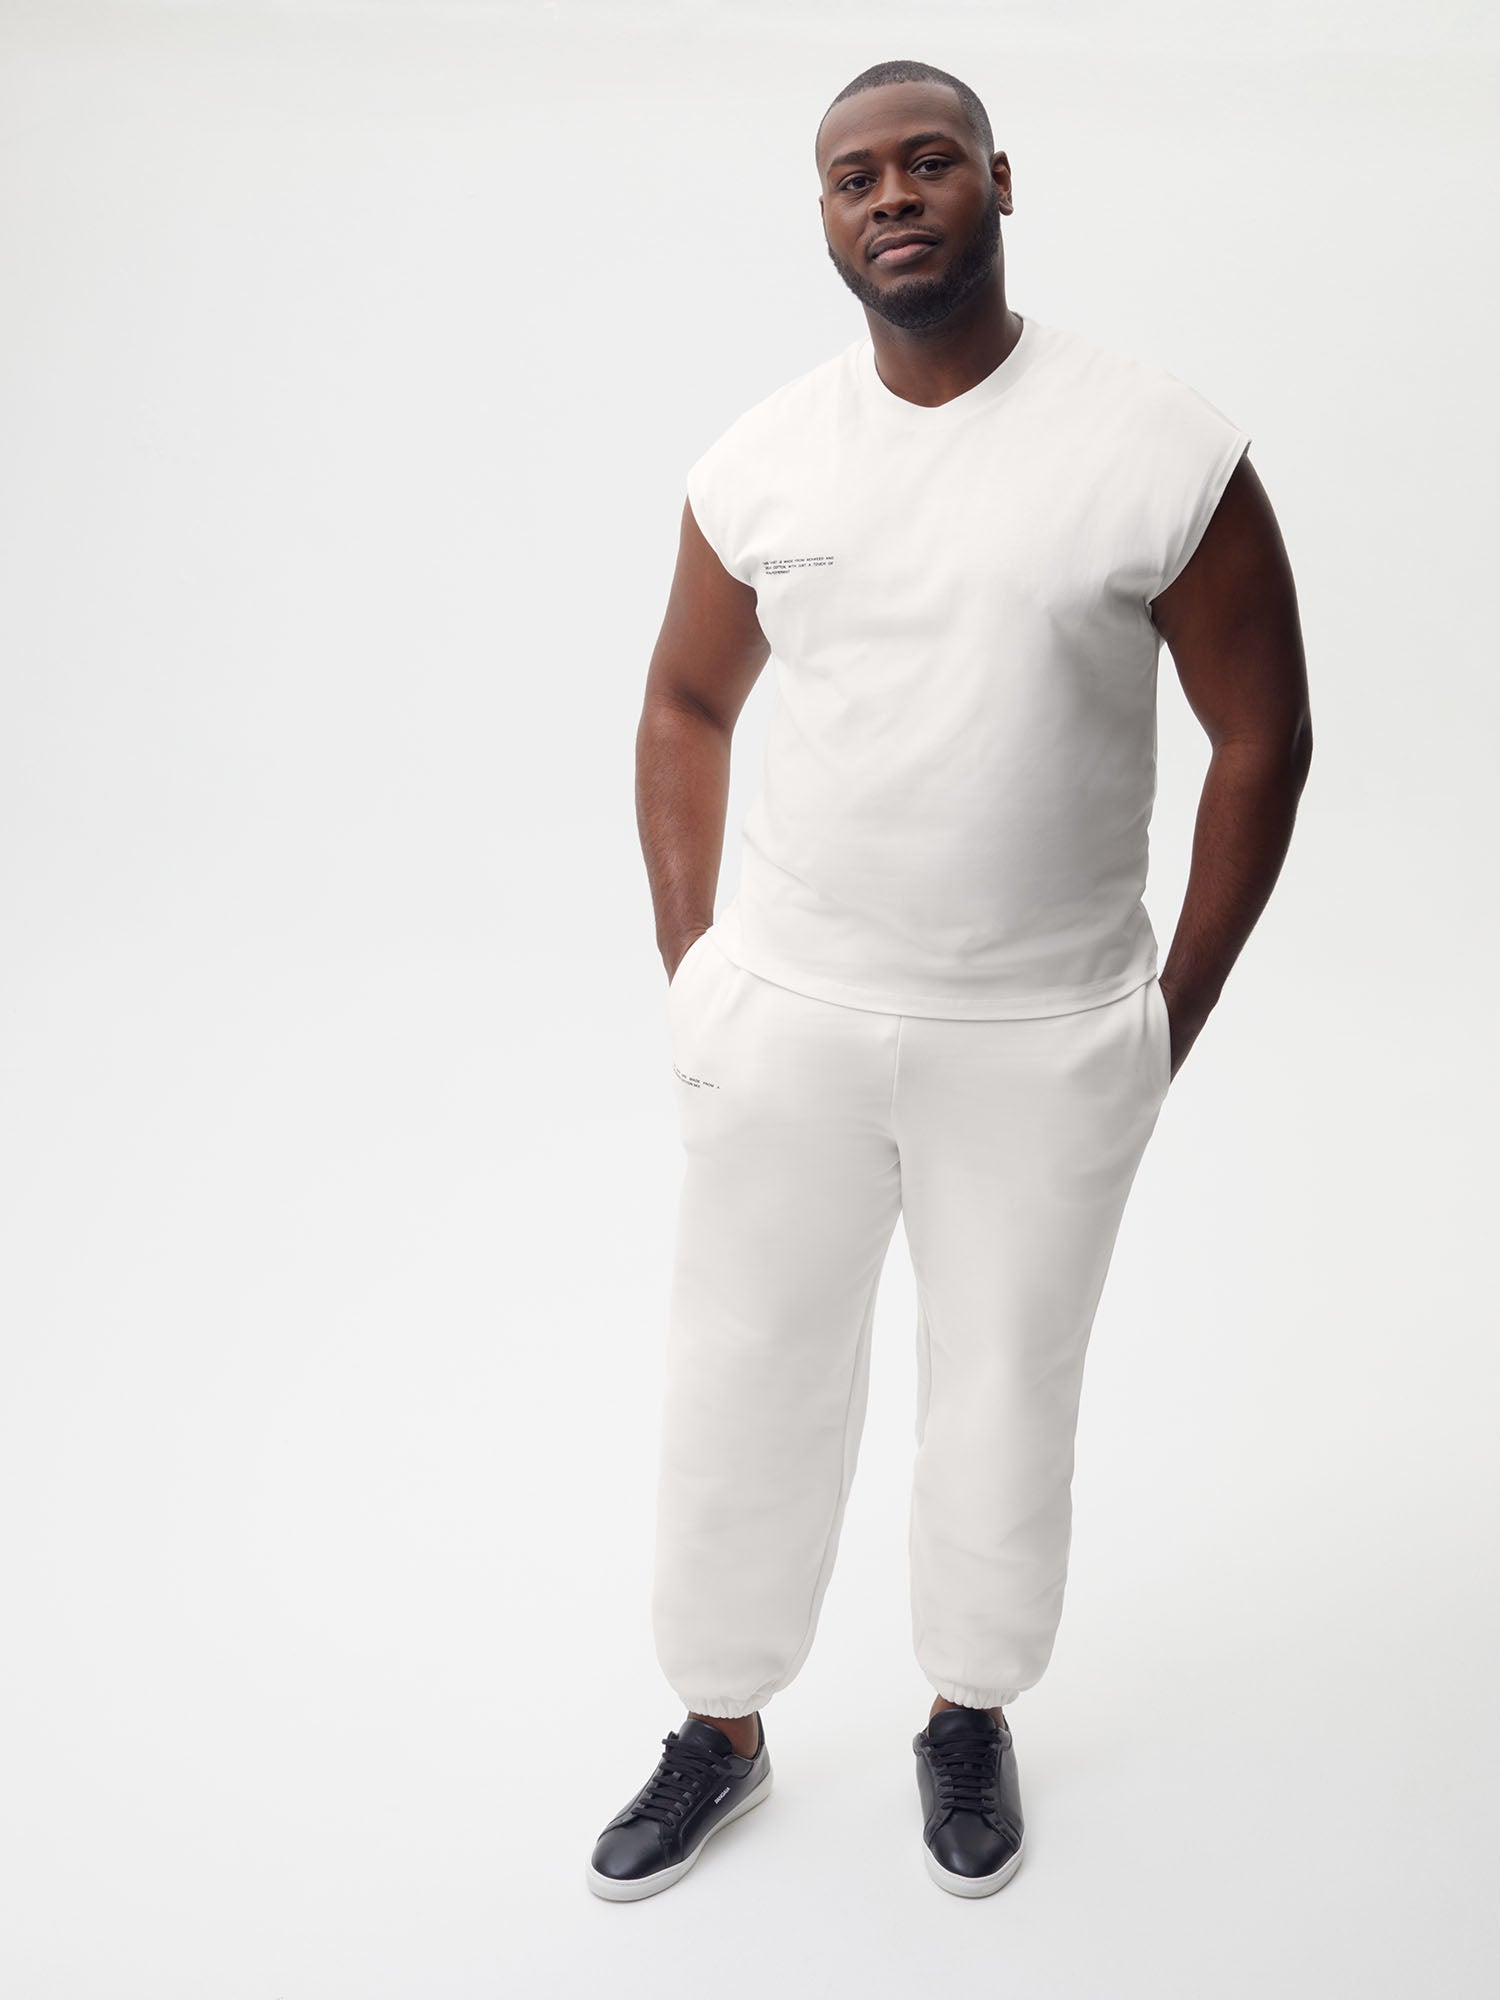 Organic Cotton Cropped Shoulder Off White T Shirt Male